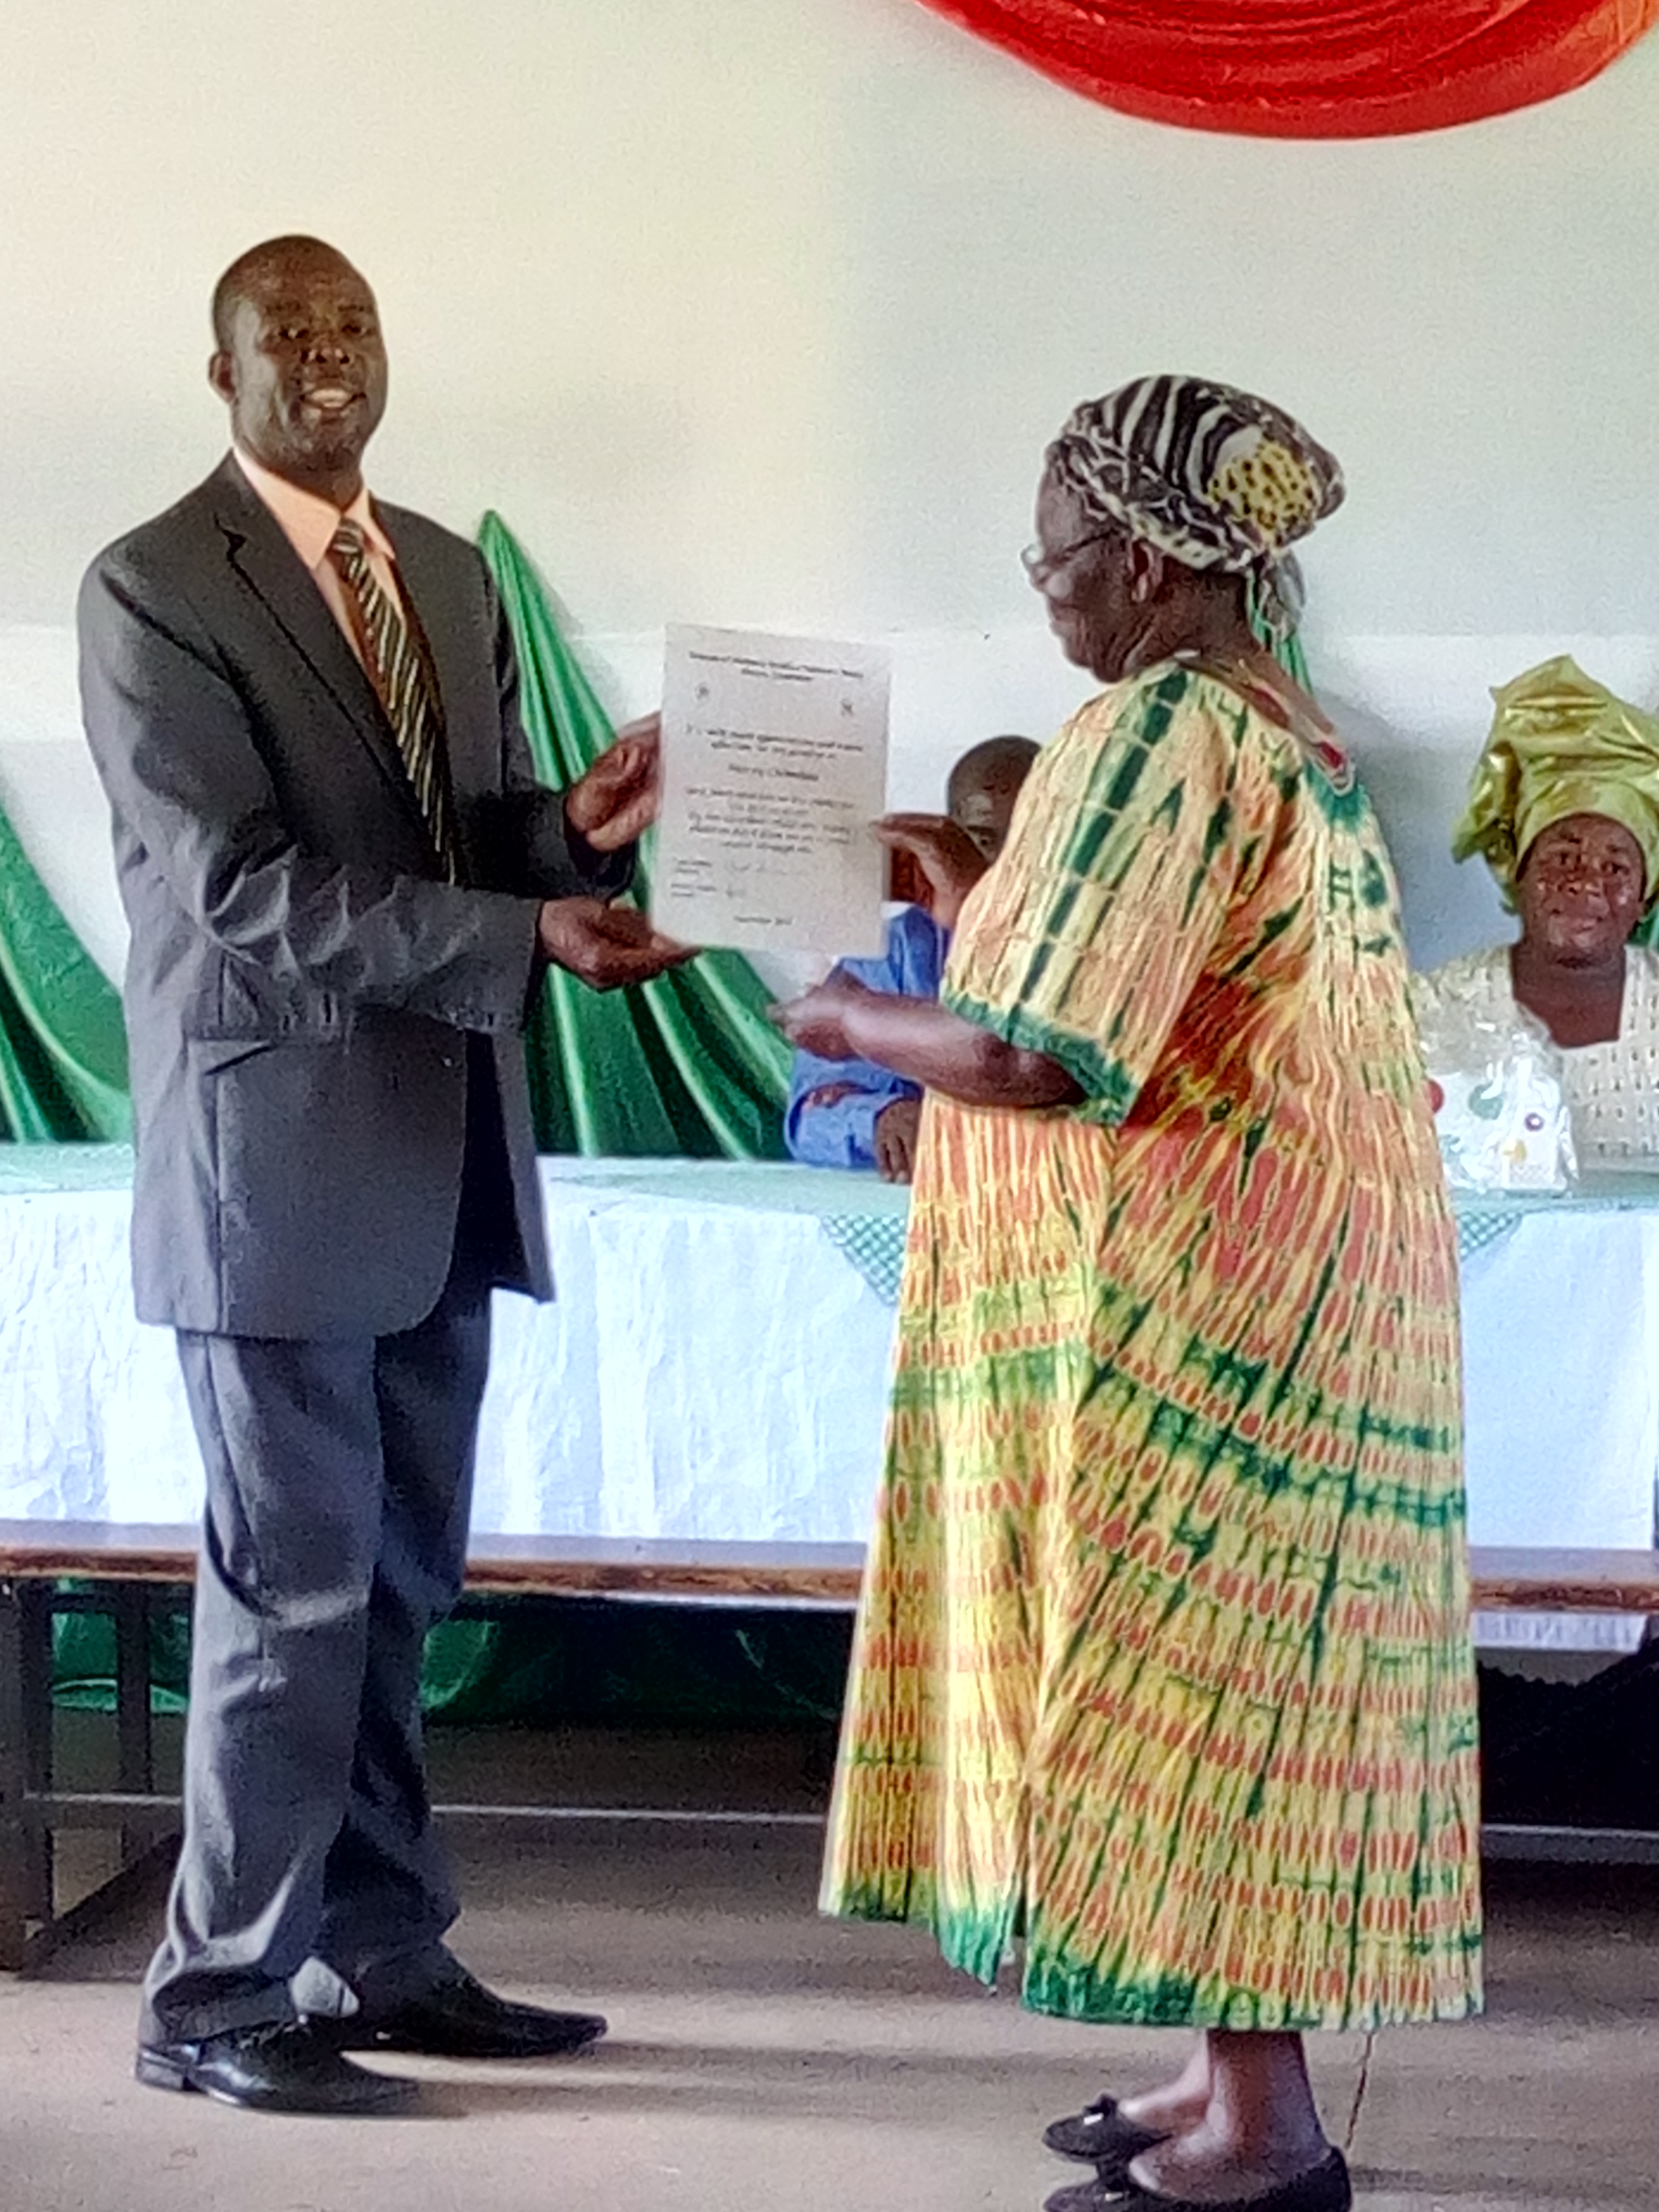 Mercy, the longest serving house mother at 32 years, retires. Here she receives a certificate of appreciation from the Friends of MRCH. Mercy cooked the main meal for visitors and staff  as well as the 10-12 children in her care